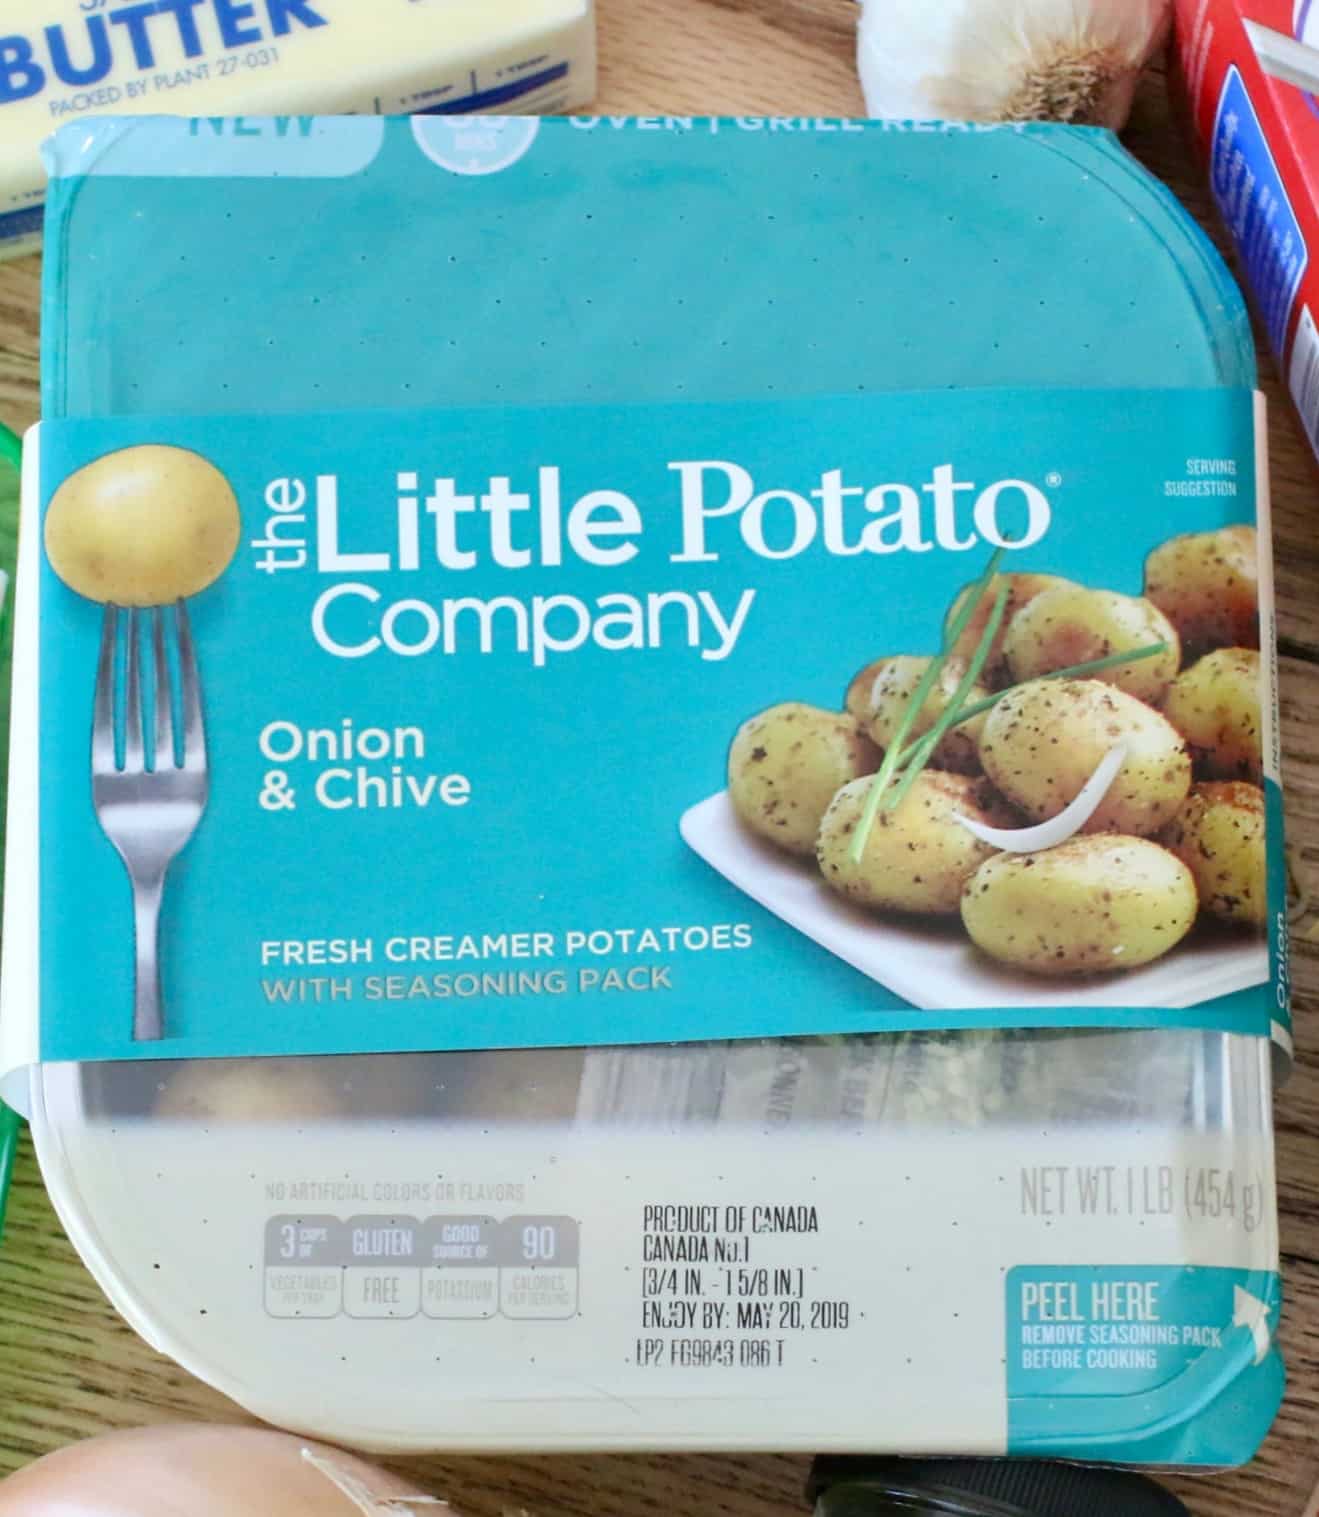 Onion and Chive Little Potatoes packaging.